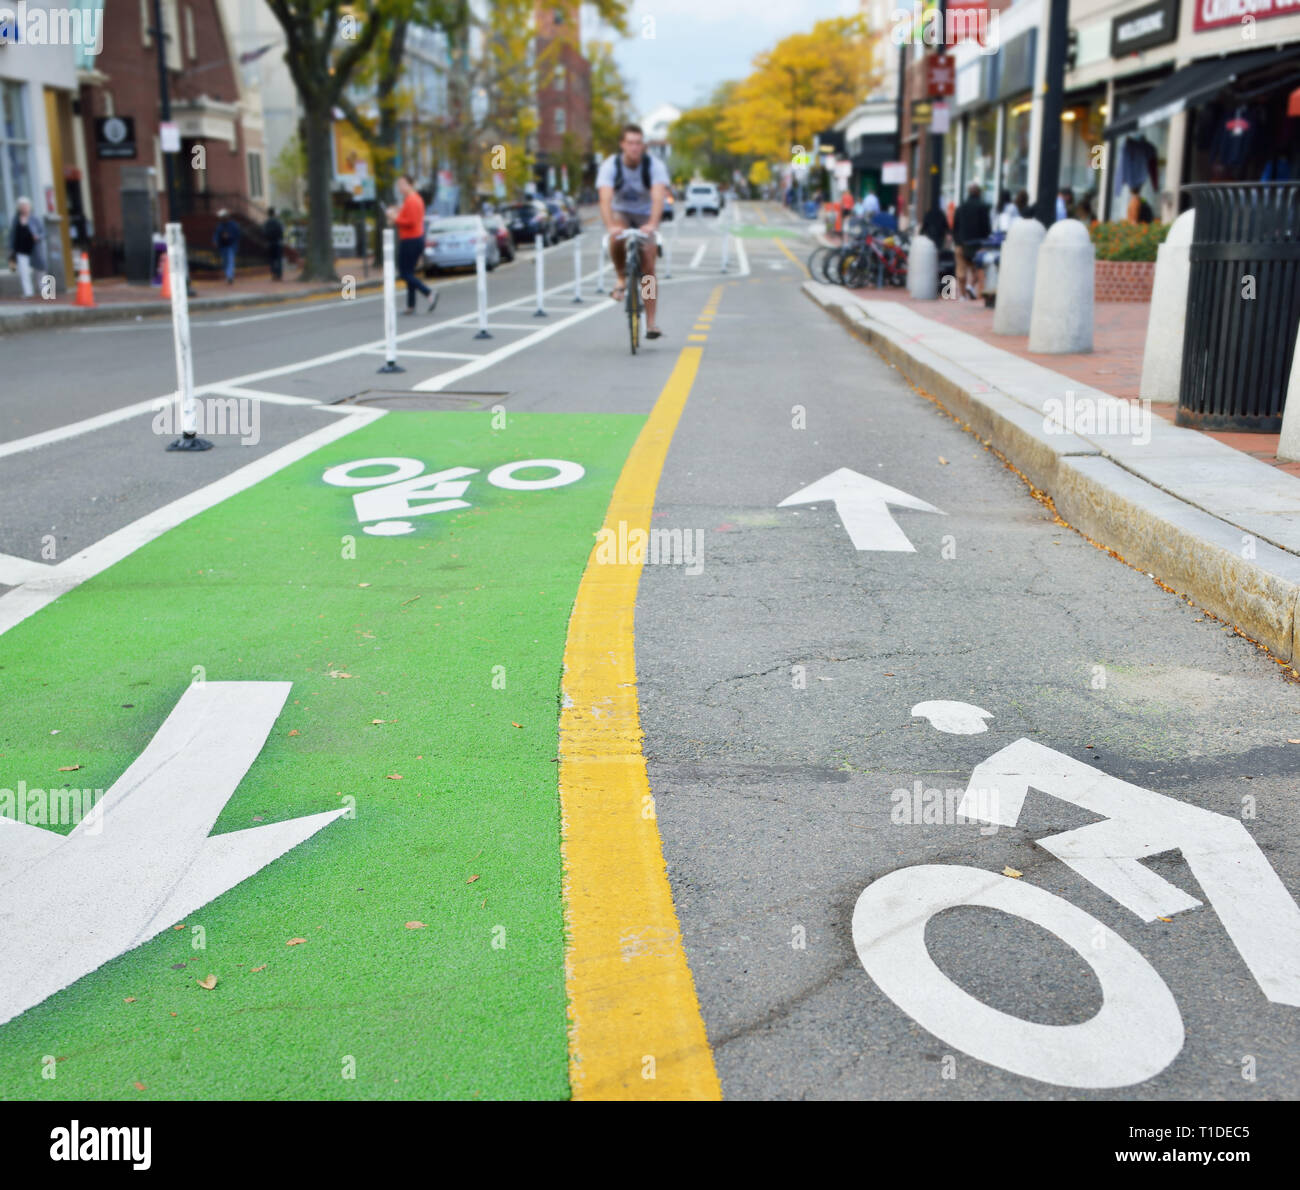 Two-way protected bike lane. Painted pavement markers in green, yellow and white. Biker and people walking on city street Stock Photo